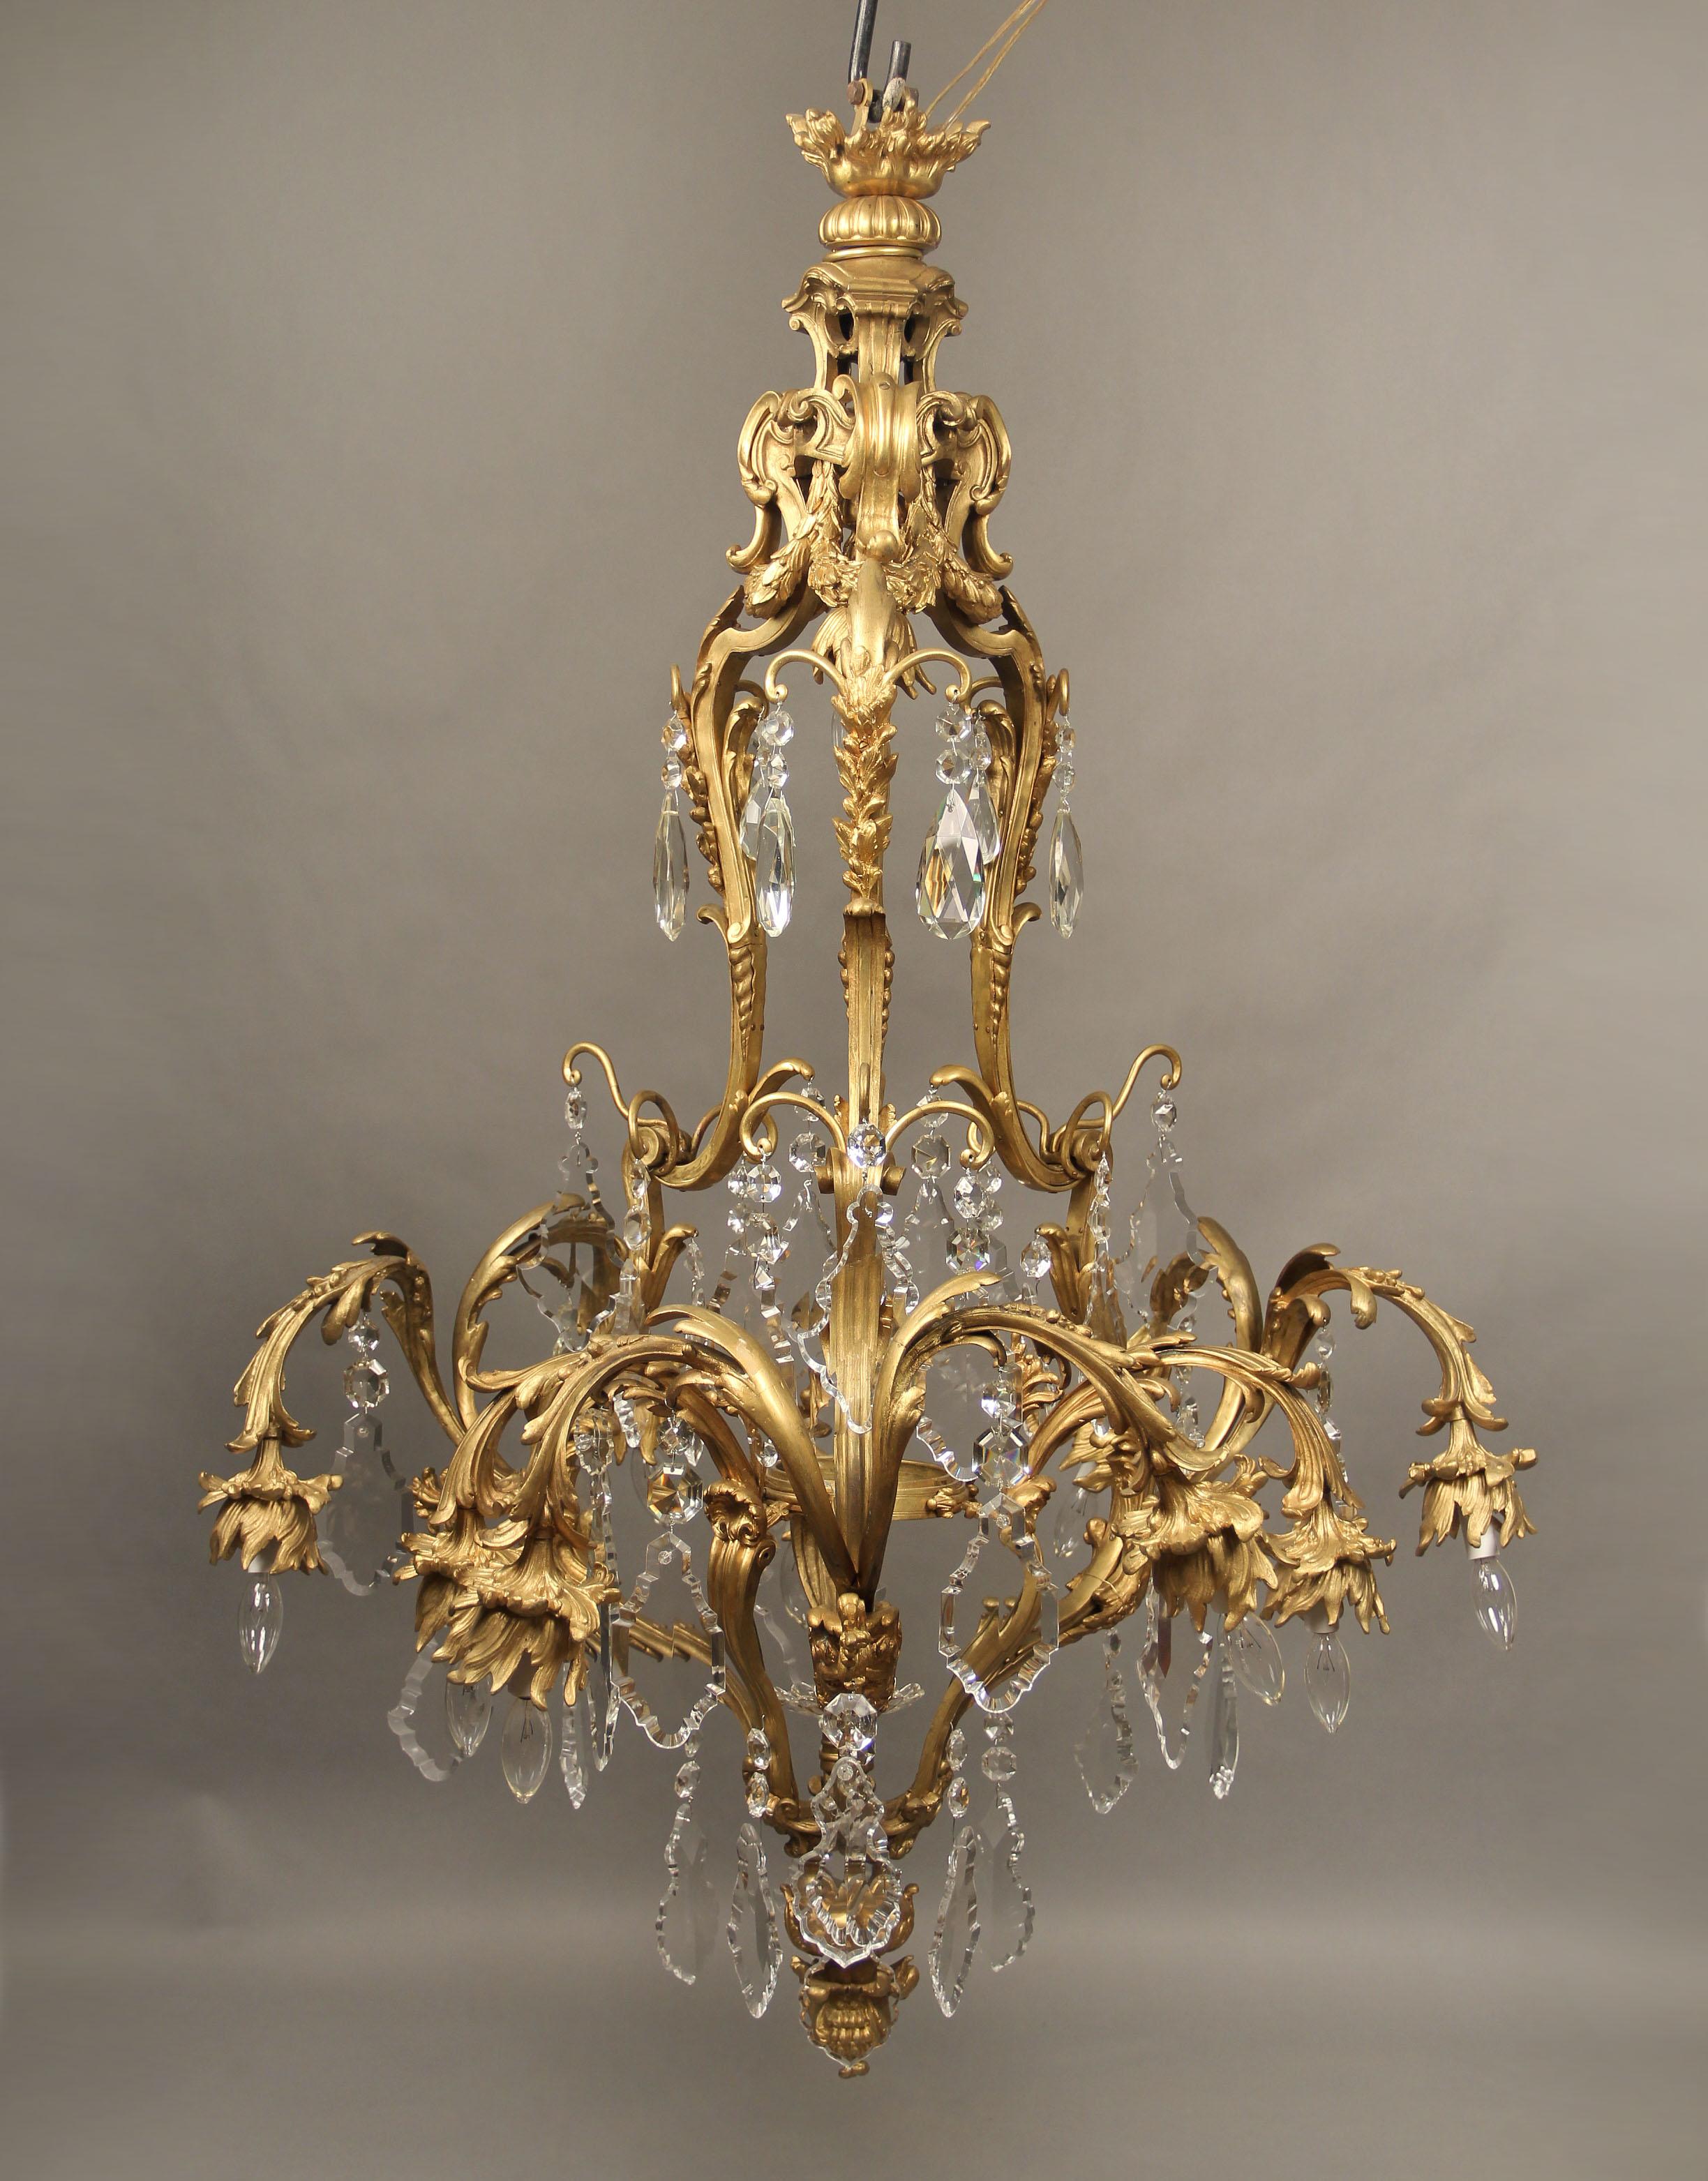 A fine early 20th century gilt bronze and crystal eleven-light chandelier

A bronze casted cage, designed with three male masks, flowers, shells and reefs, with multifaceted and shaped crystals, nine perimeter and two interior lights.

If you